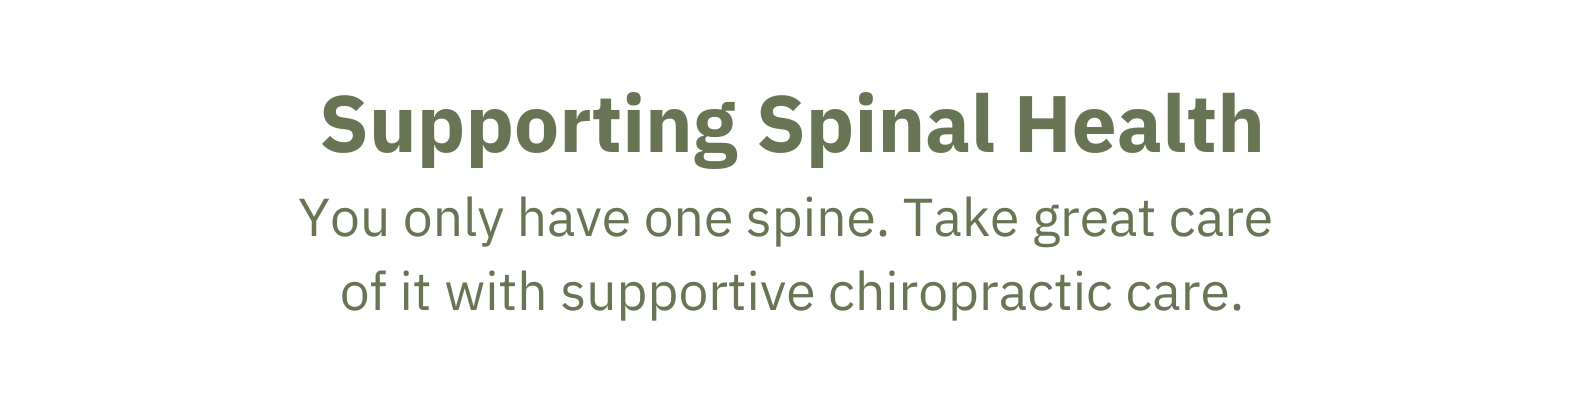 Supporting Spinal Health